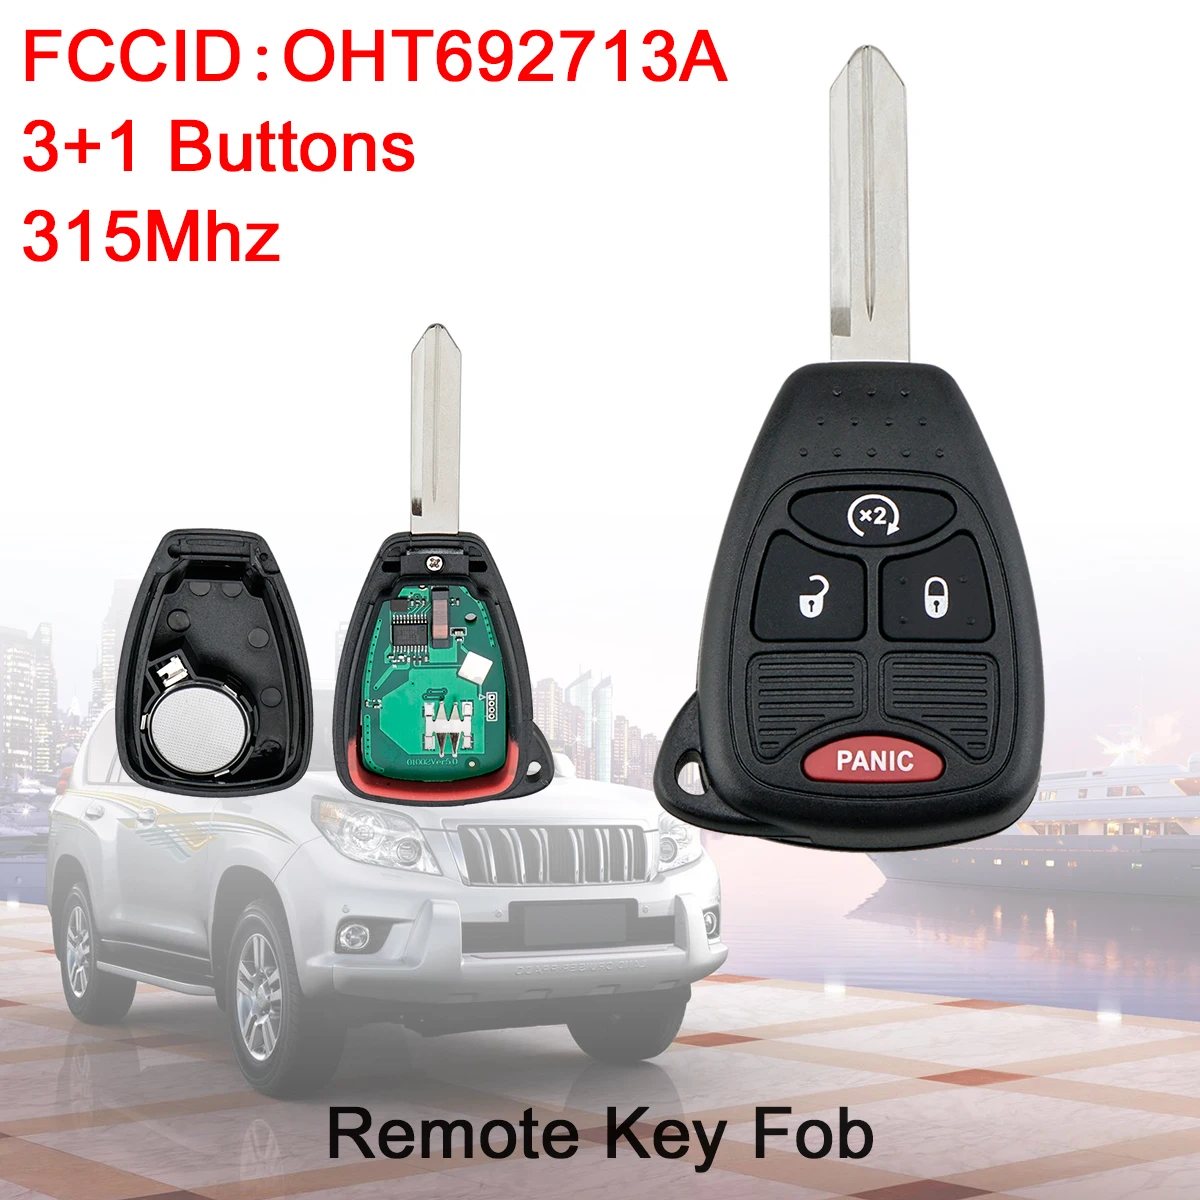 3+1 Button 315MHz Keyless Remote Car Key Fob ID46Chip OHT692713A Keyless Entry Key for Jeep Compass 2012 2013 2014 2015 2016